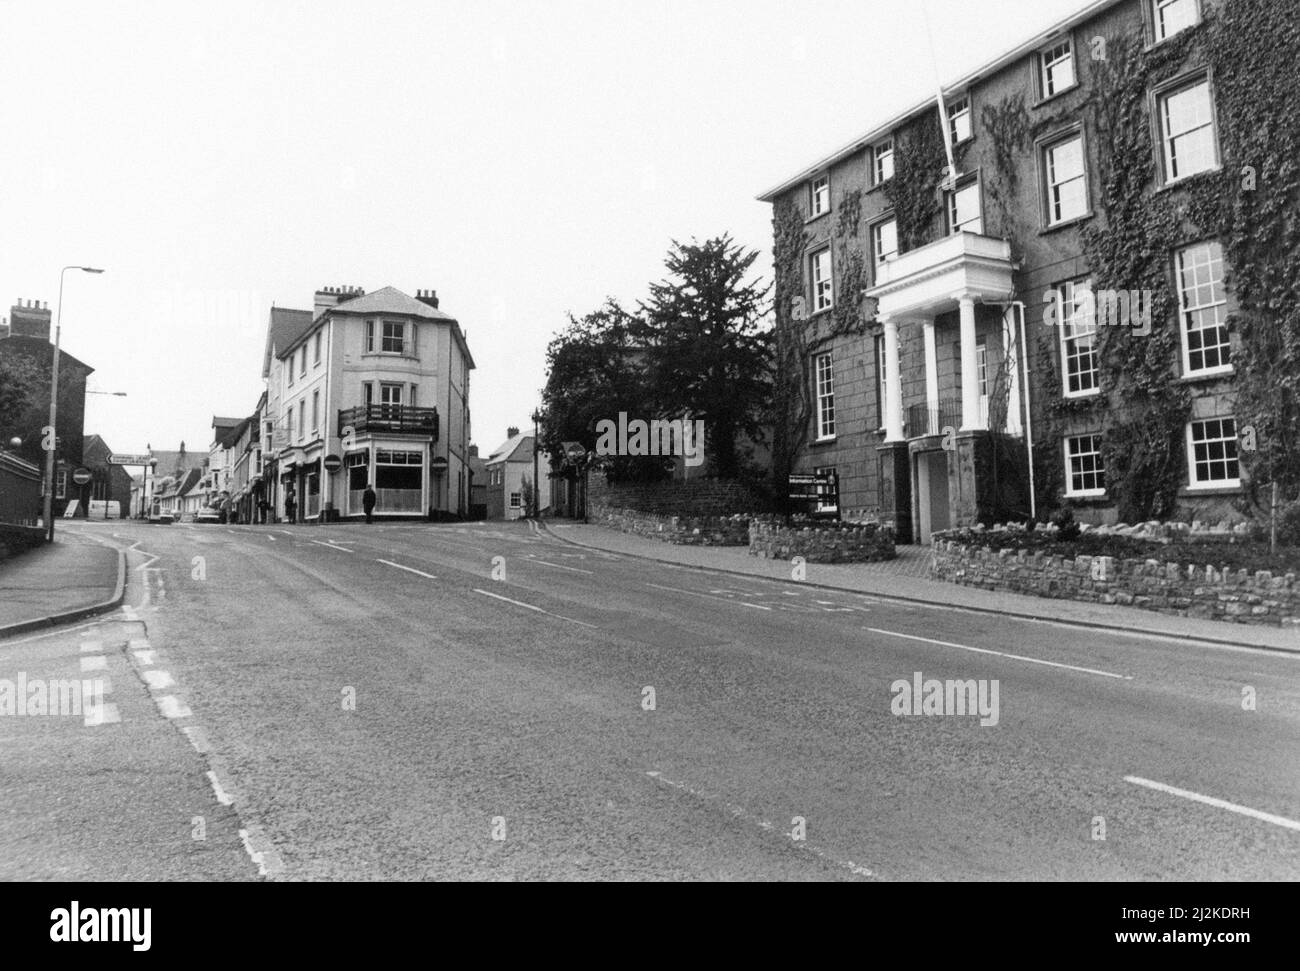 Brecon, a market town and community in Powys, Mid Wales, 18th May 1987. Stock Photo